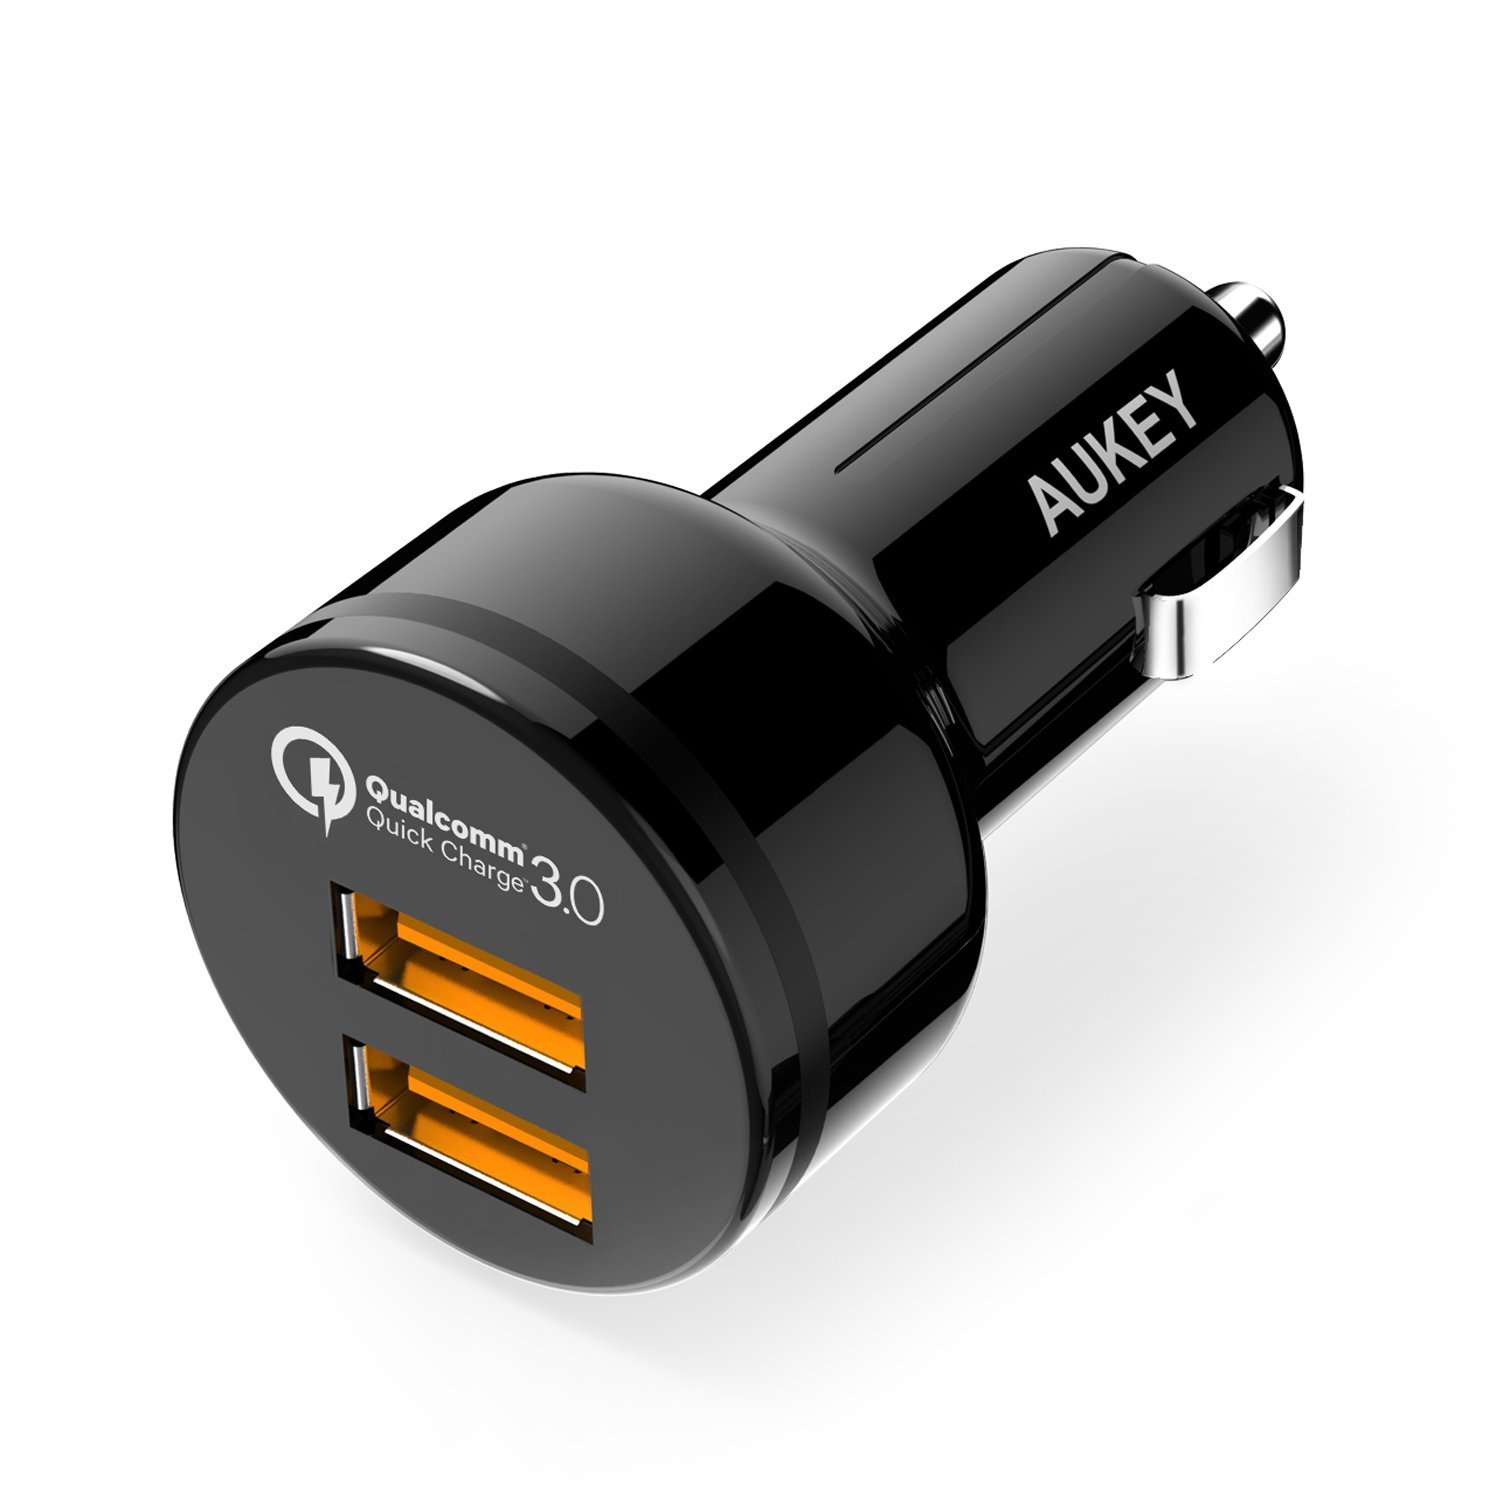 Prime Day deal: Aukey dual port quick charge 3.0 car charger for $11